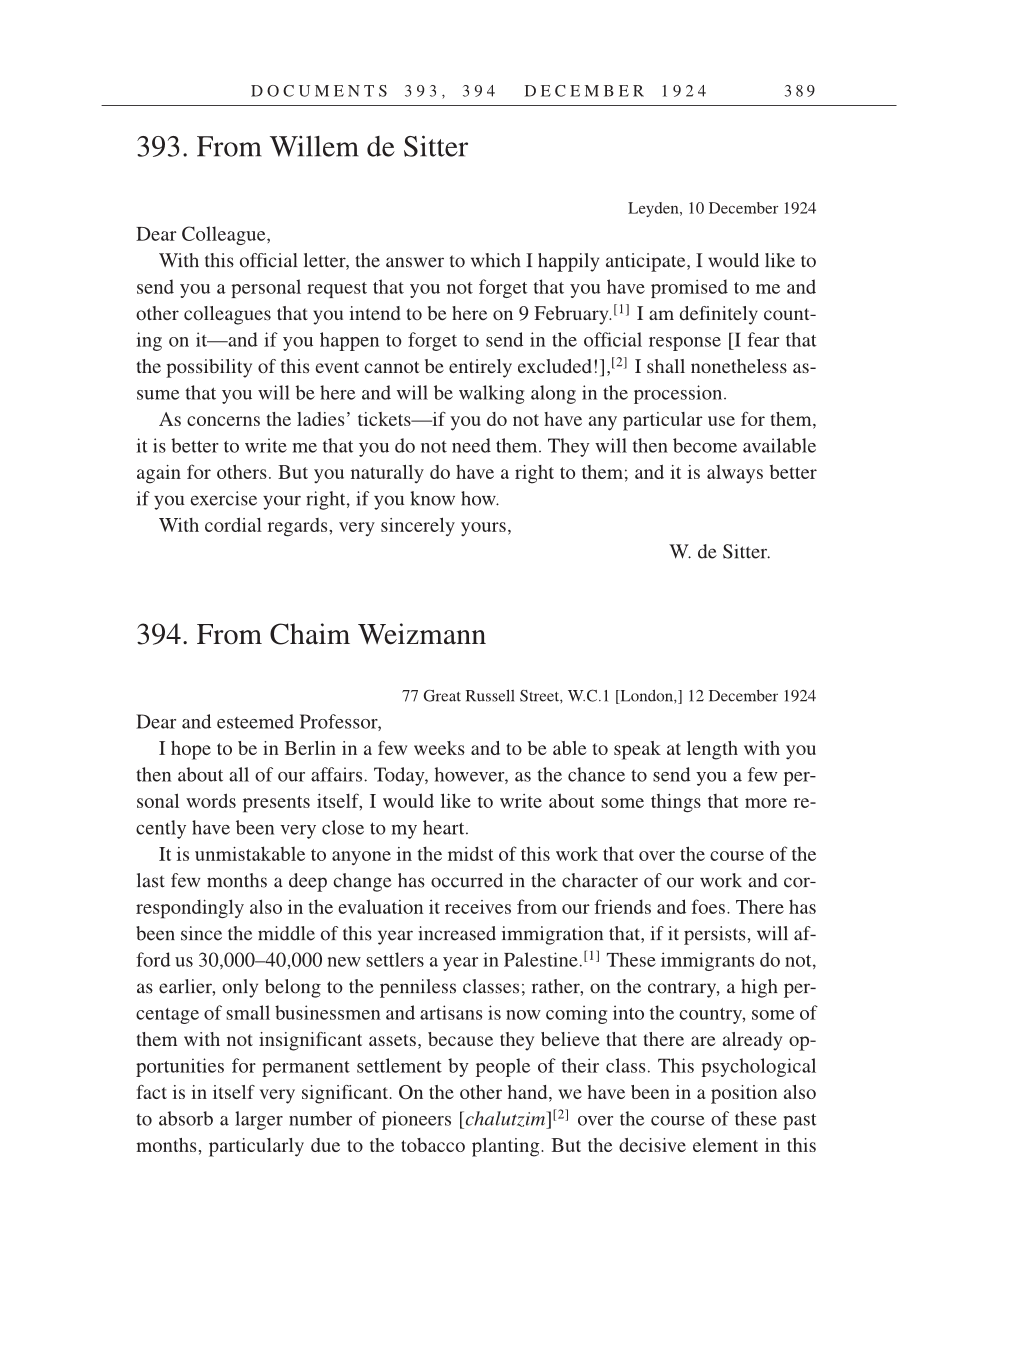 Volume 14: The Berlin Years: Writings & Correspondence, April 1923-May 1925 (English Translation Supplement) page 389